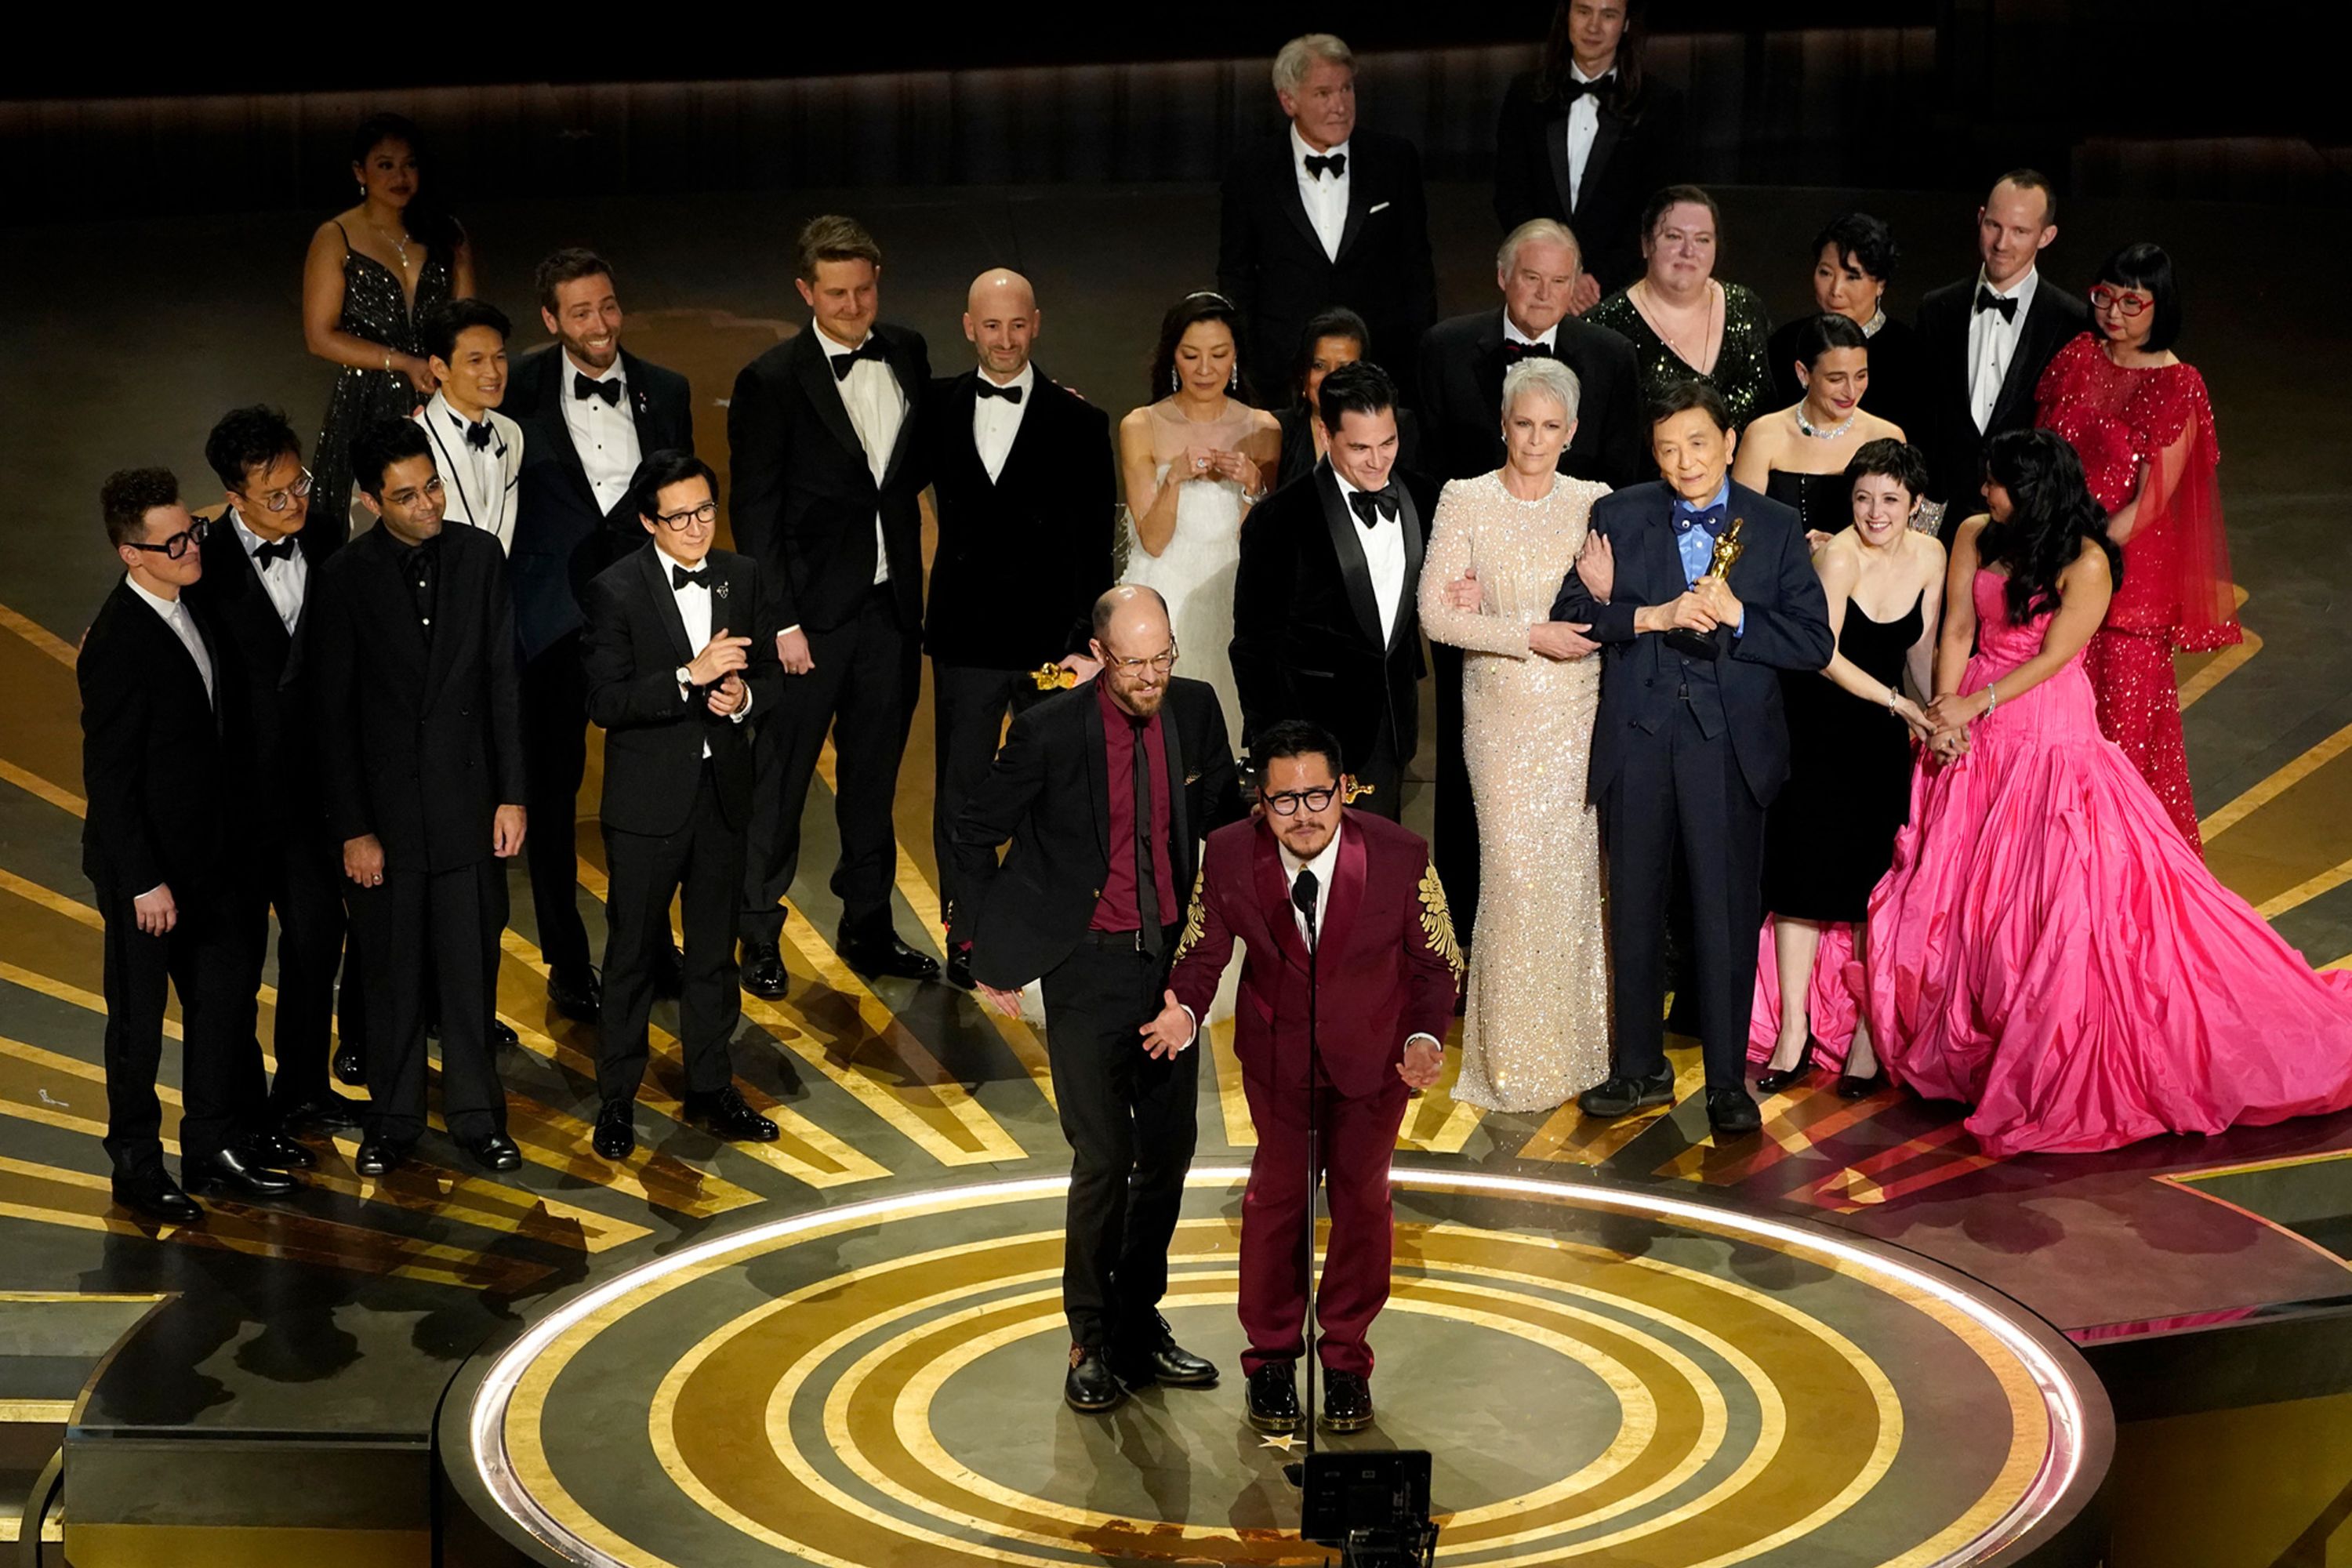 The cast and crew of "Everything Everywhere All at Once" accepts the Academy Award for best picture on Sunday, March 12.